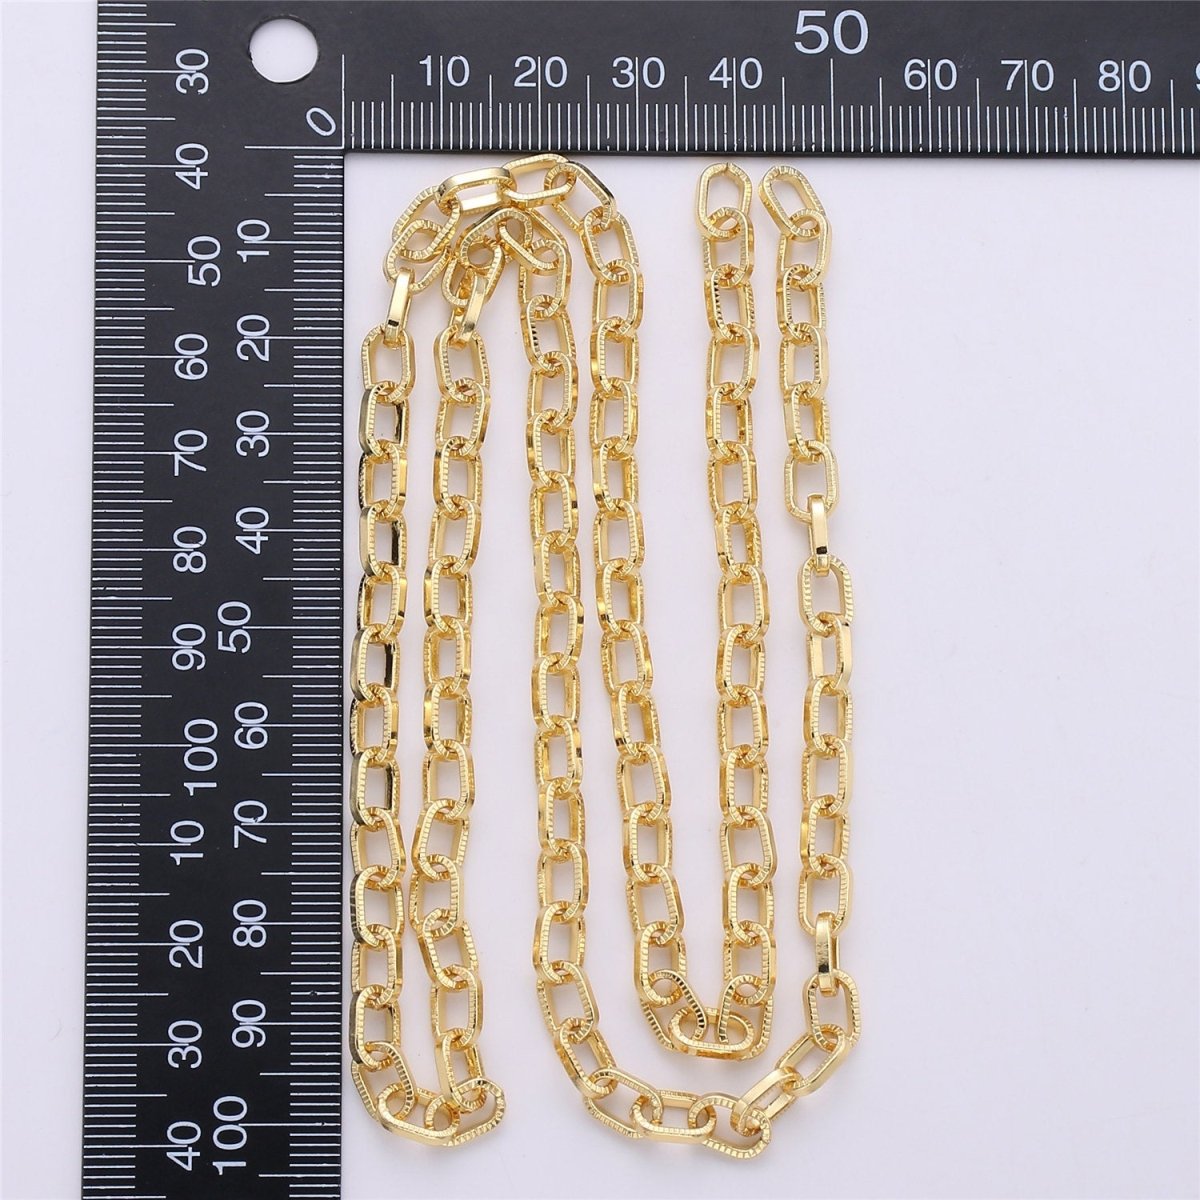 24K Gold Filled Paper Clip Chain, Unfinished Chain by Yard, Rectangle Drawn for Bracelet, Necklace Jewelry Making Supply 6x10mm | ROLL-092, ROLL-093 Clearance Pricing - DLUXCA